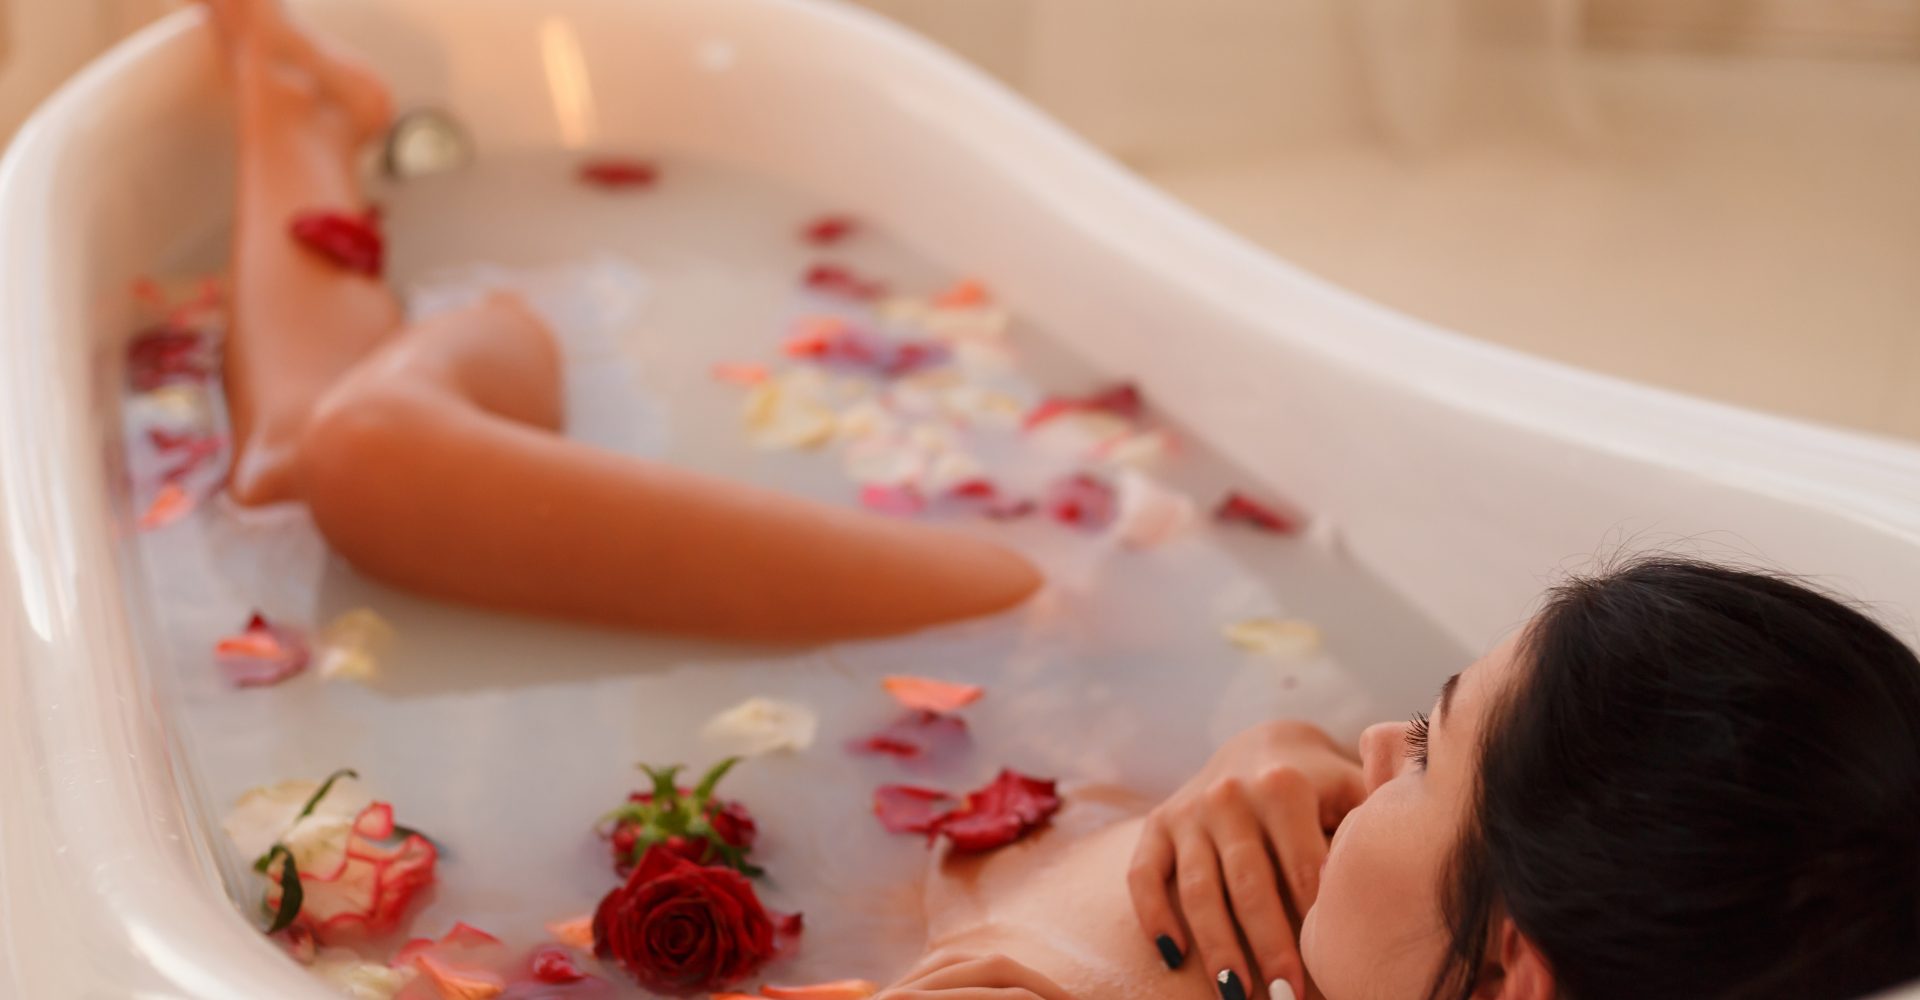 Attractive girl takes a bath with milk and rose petals. Spa treatments for skin rejuvenation